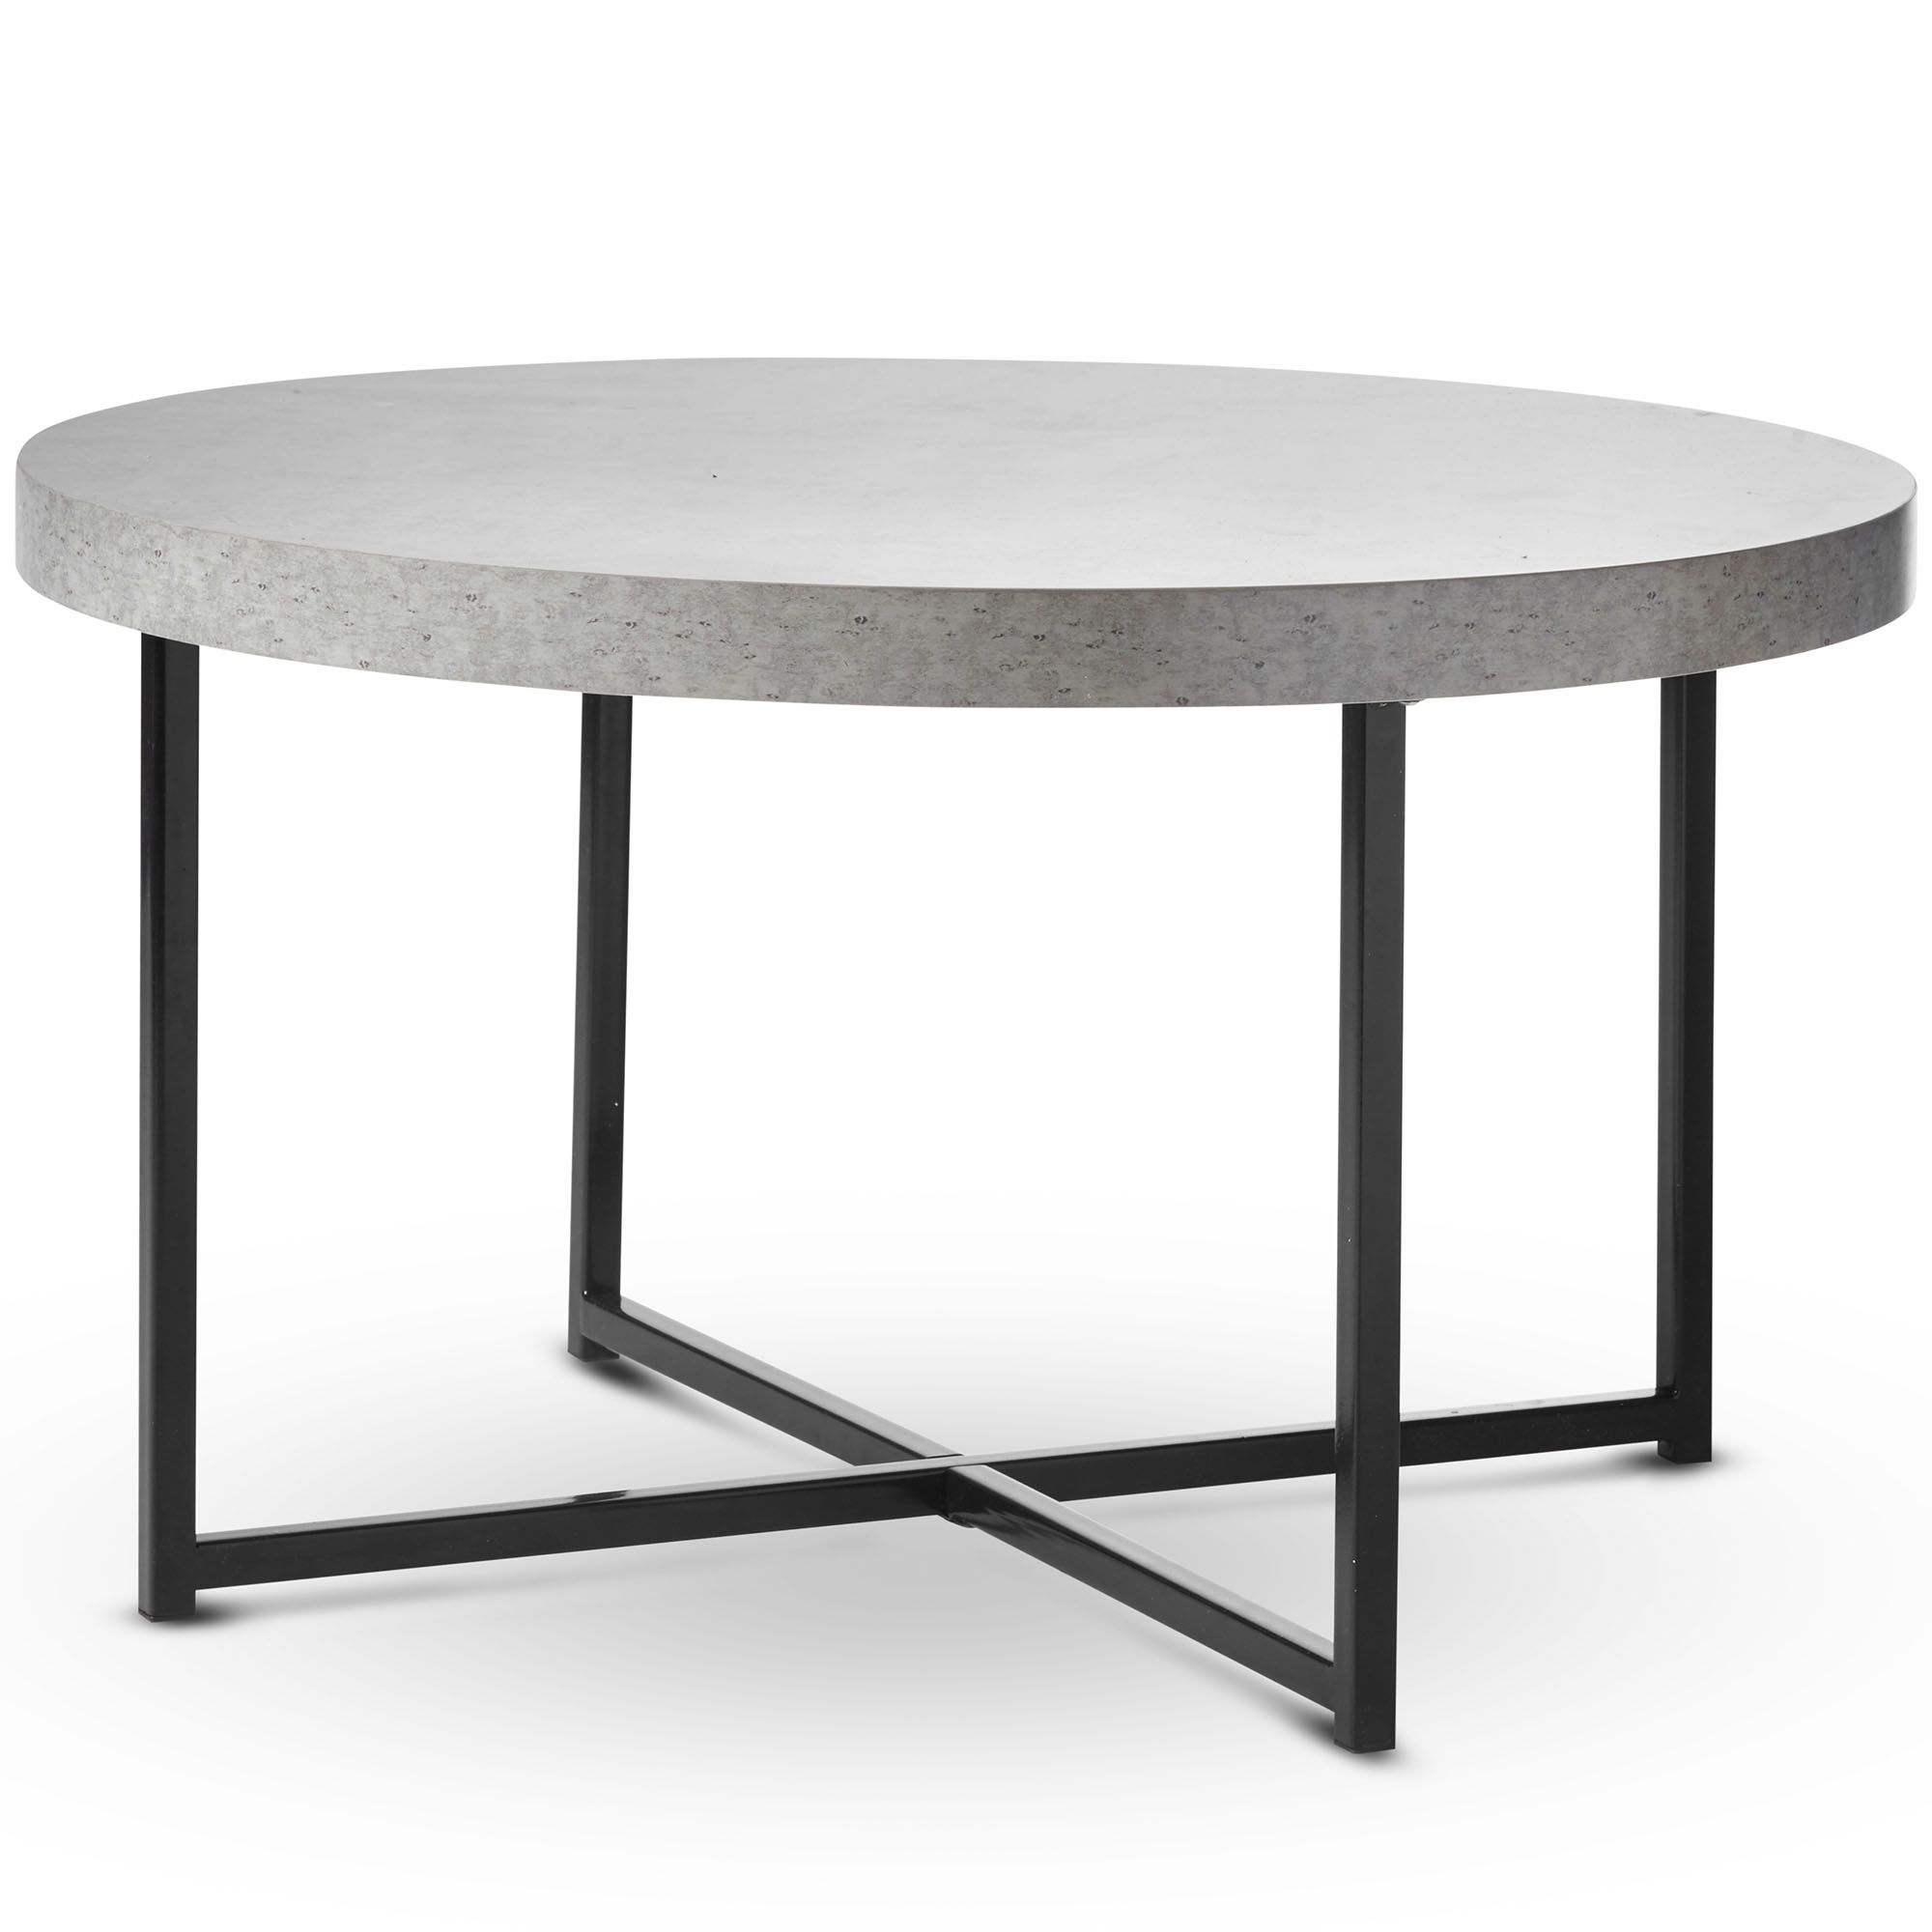 Vonhaus Concrete Look Round Coffee Table Modern Lightweight Intended For Most Recently Released Modern Concrete Coffee Tables (View 5 of 10)